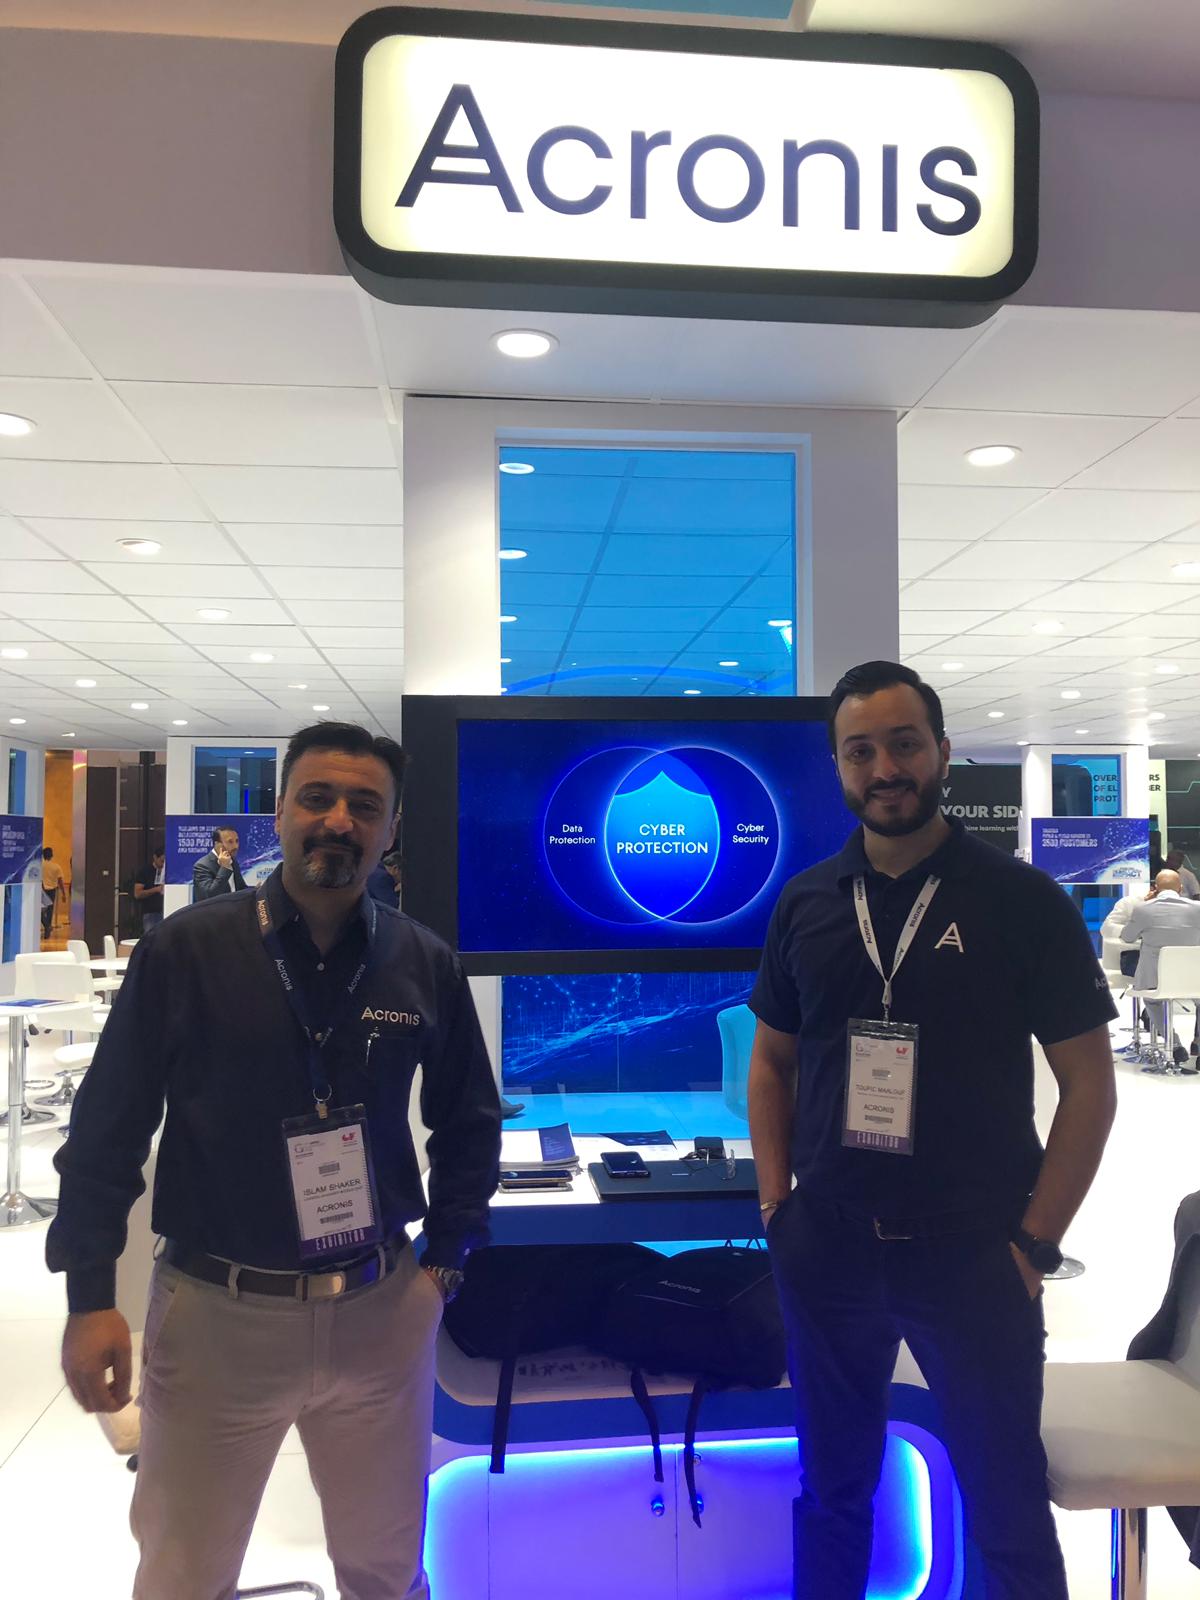 Islam Shaker and Toufic Maalouf at Acronis Stand at GITEX 2019